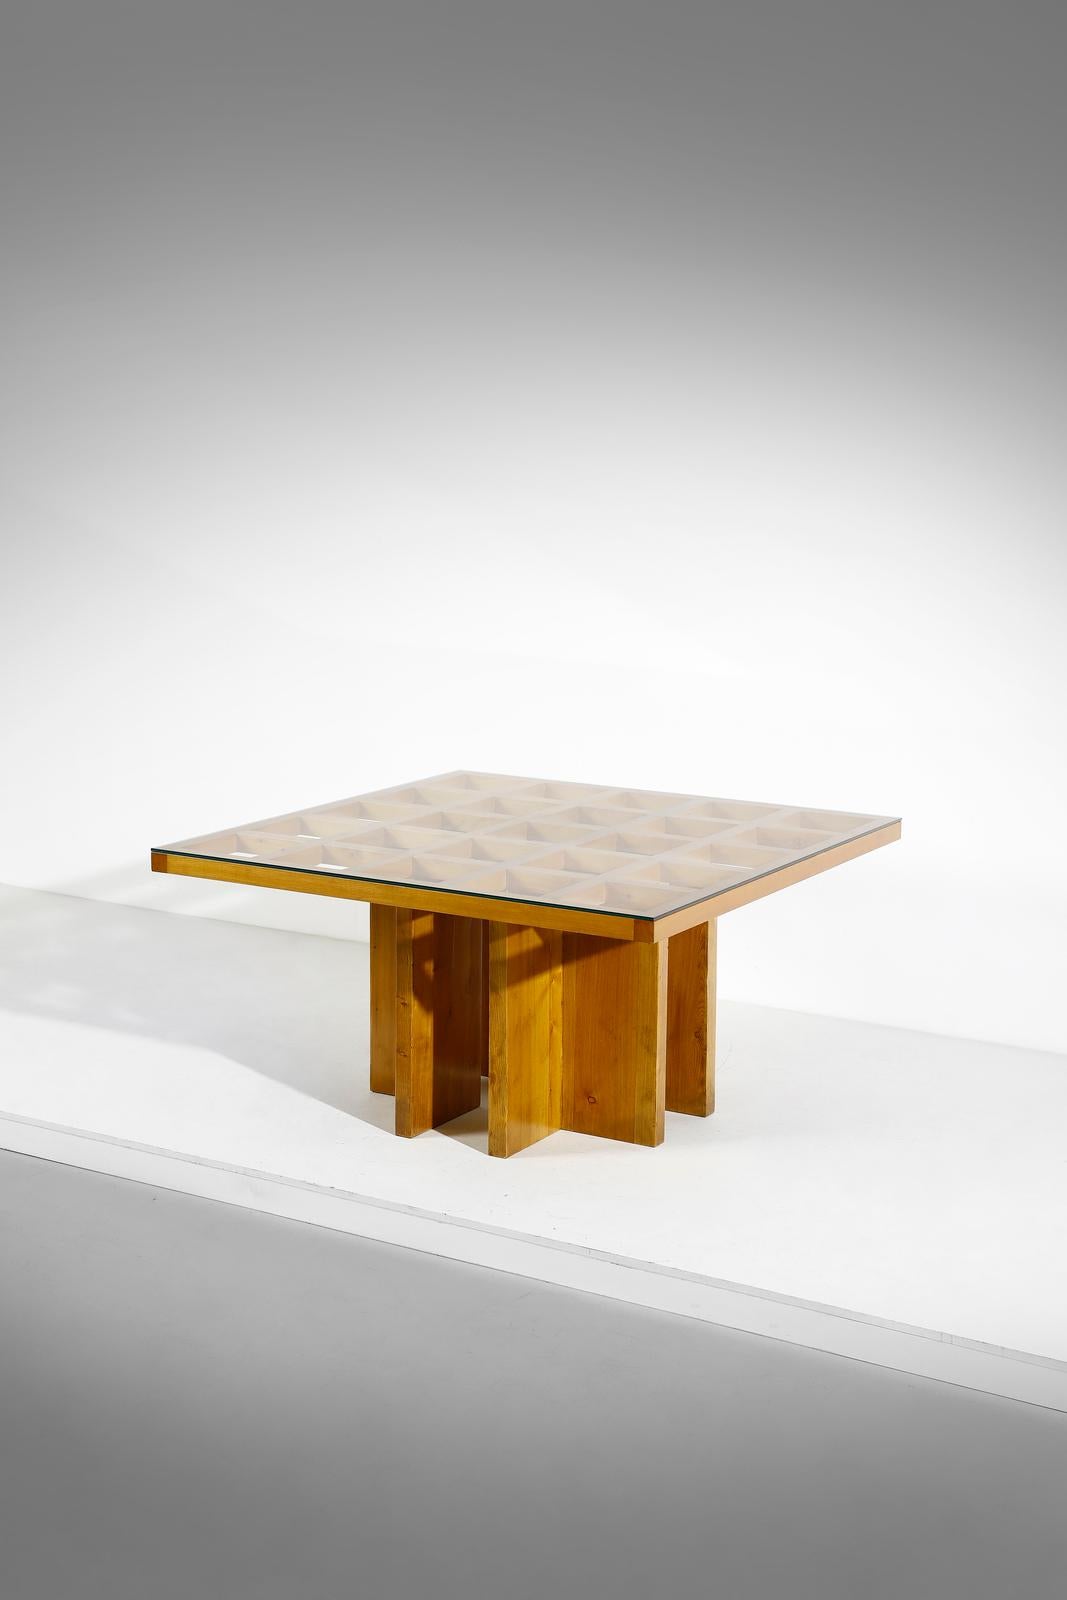 Very rare dining table in pine wood and glass top design by Gianfranco Fini manufactured by Poltronova in 1975. Made in Italy
Structure in pine wood, tempered glass top which protect a geometrical design of incredible beauty.

The table is published